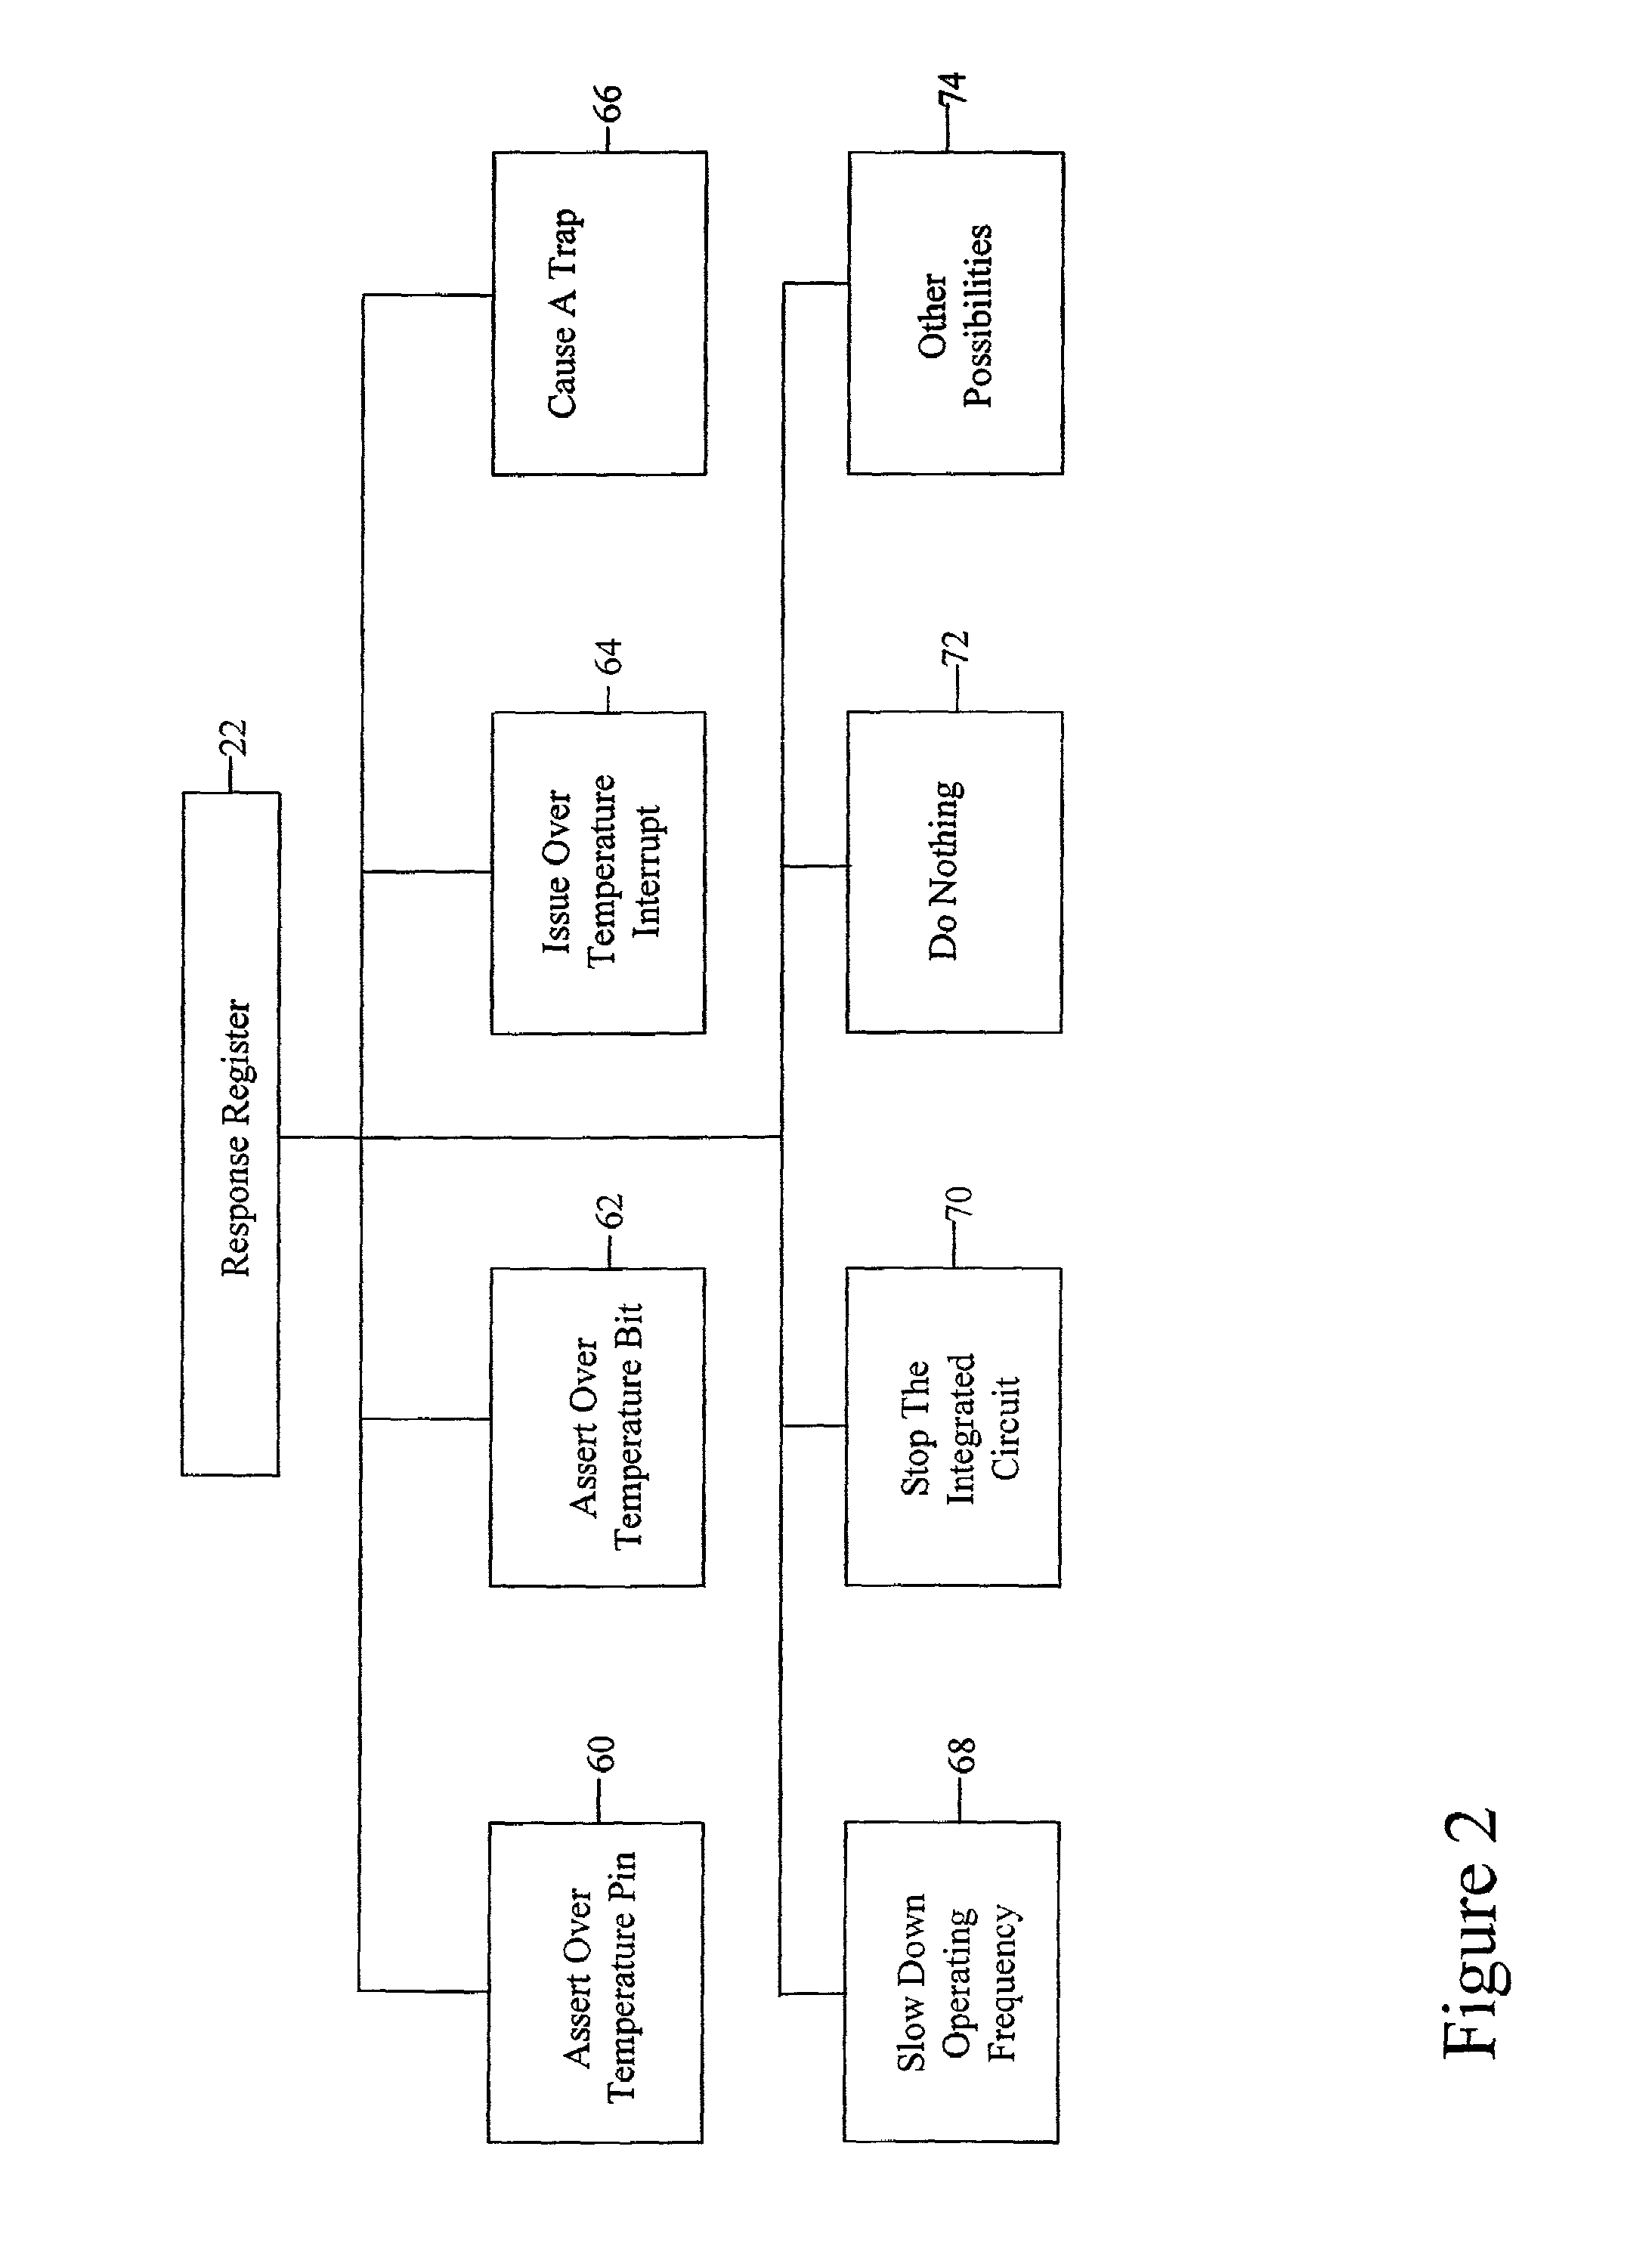 Method and system for monitoring and profiling an integrated circuit die temperature